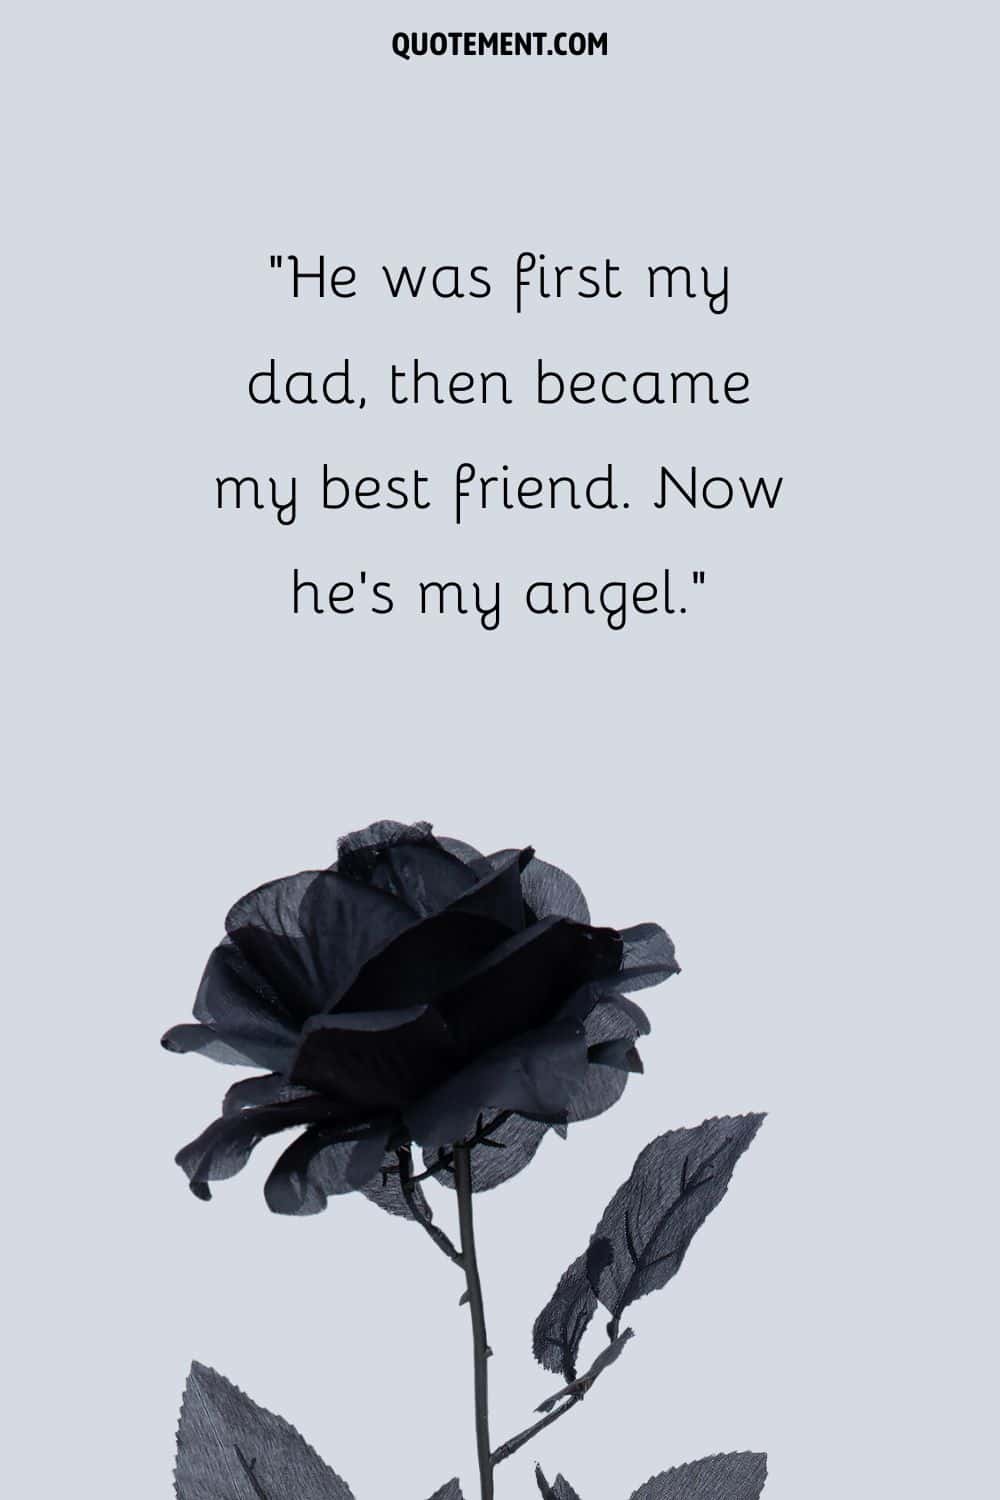 He was first my dad, then became my best friend. Now he’s my angel.